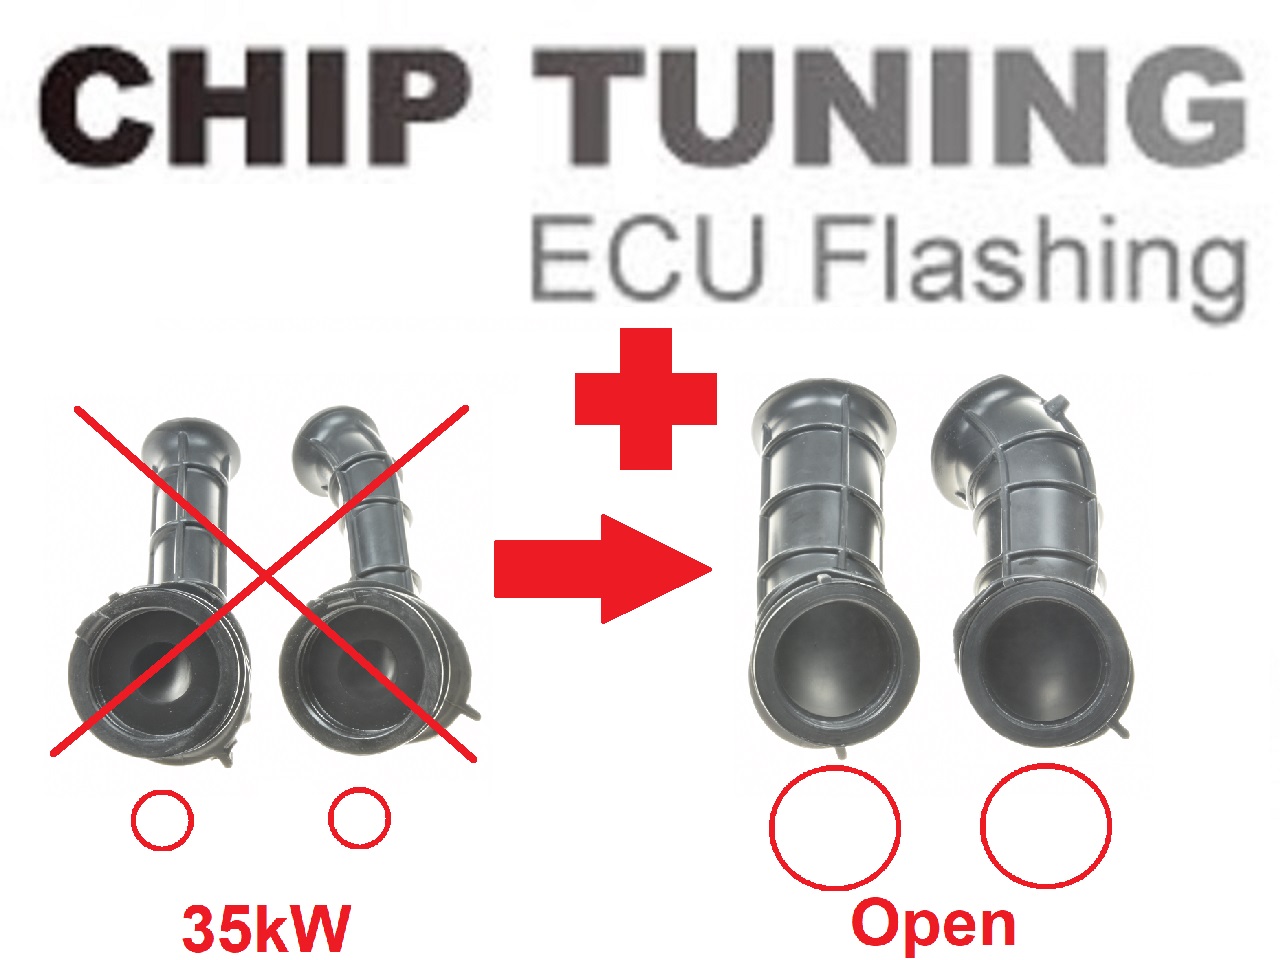 High Performance ECU Flash Tuning (Stage 2) + open lucht trechters